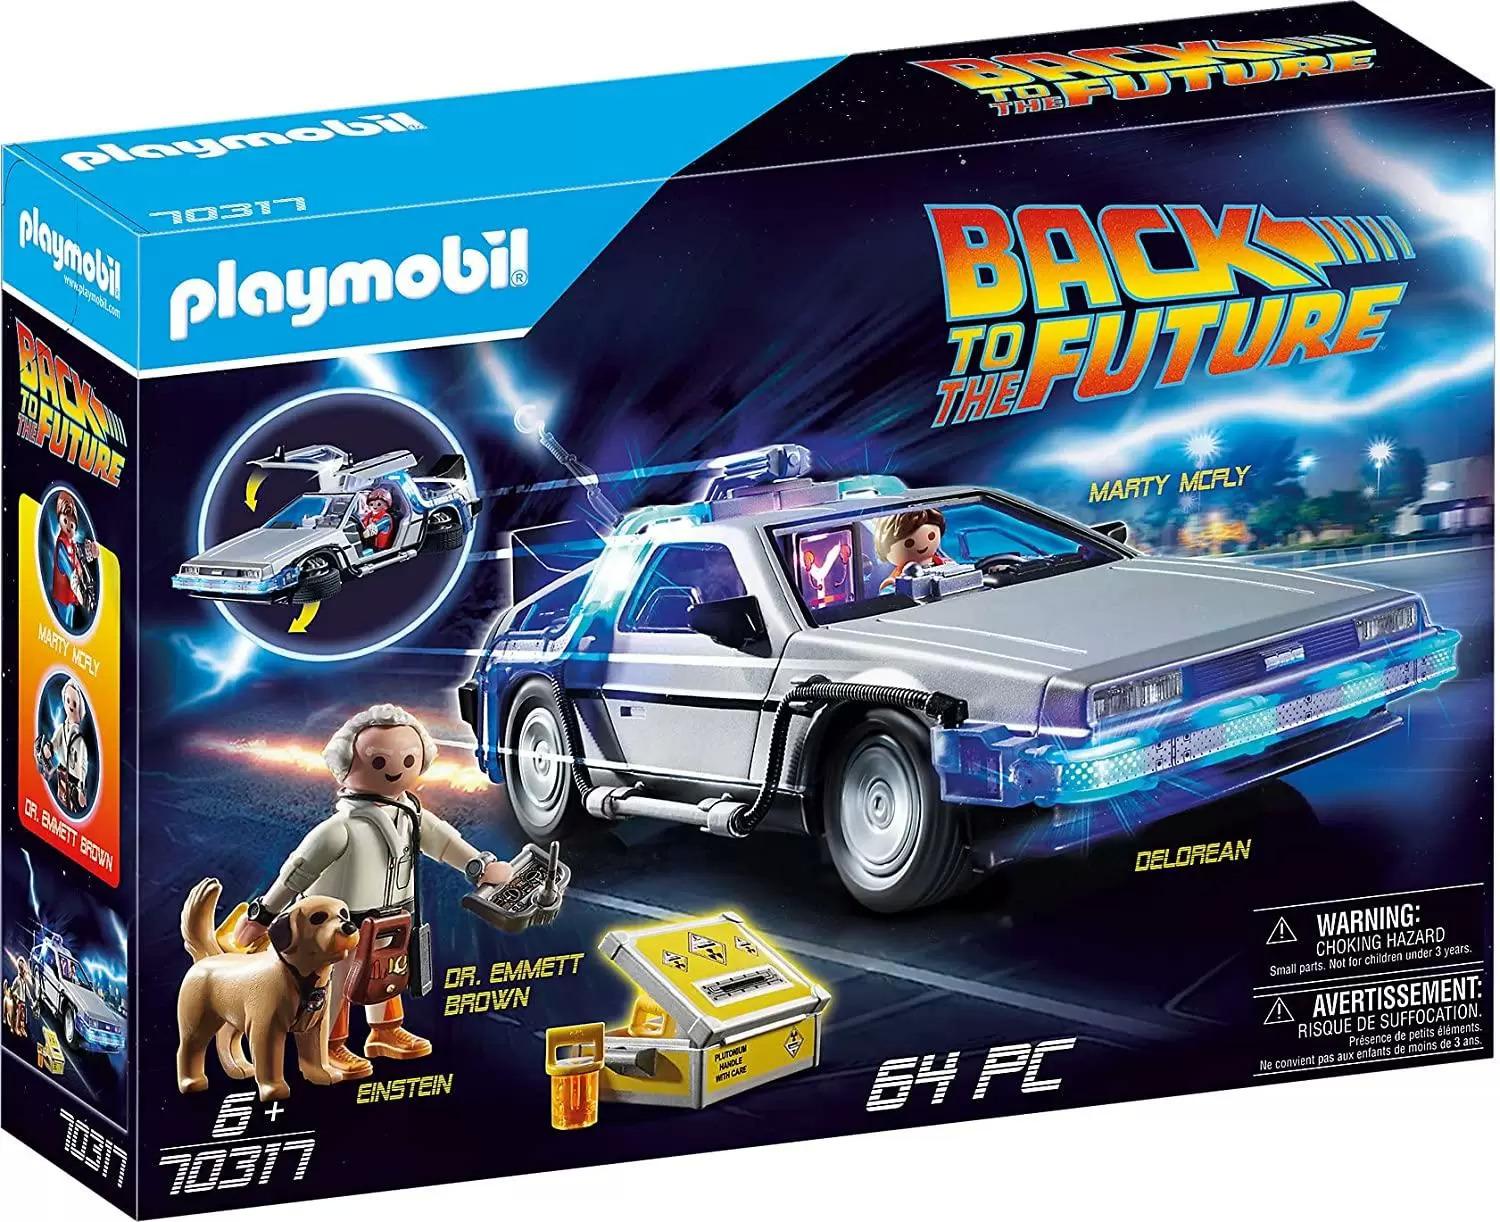 Playmobil Back to The Future DeLorean Playset for $26.99